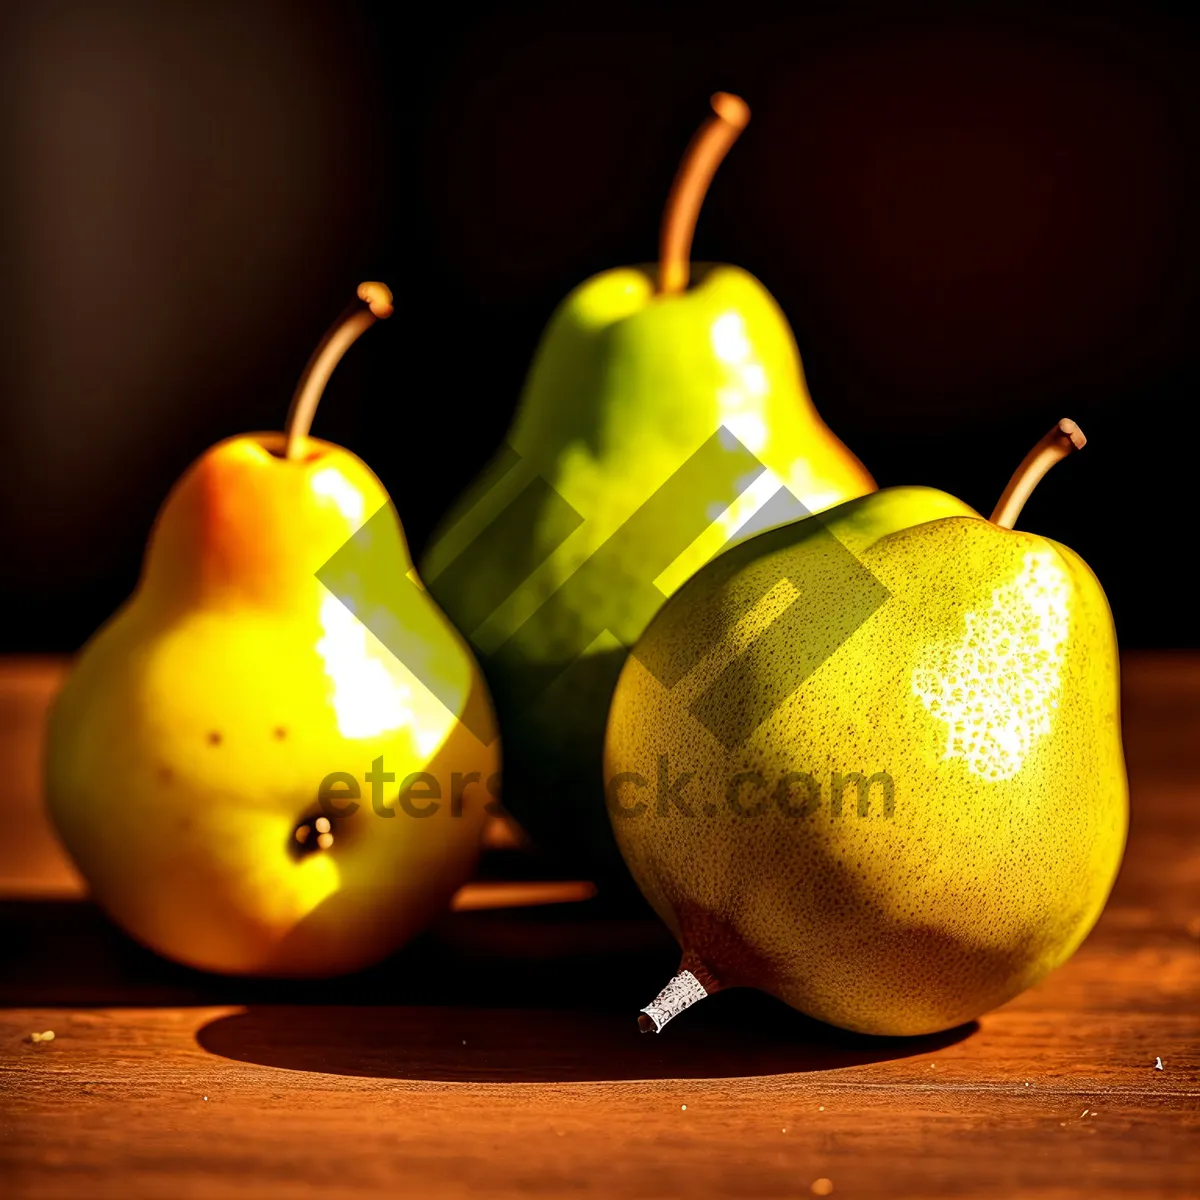 Picture of Juicy and Sweet Anchovy Pear - Ripe, Organic, and Delicious!